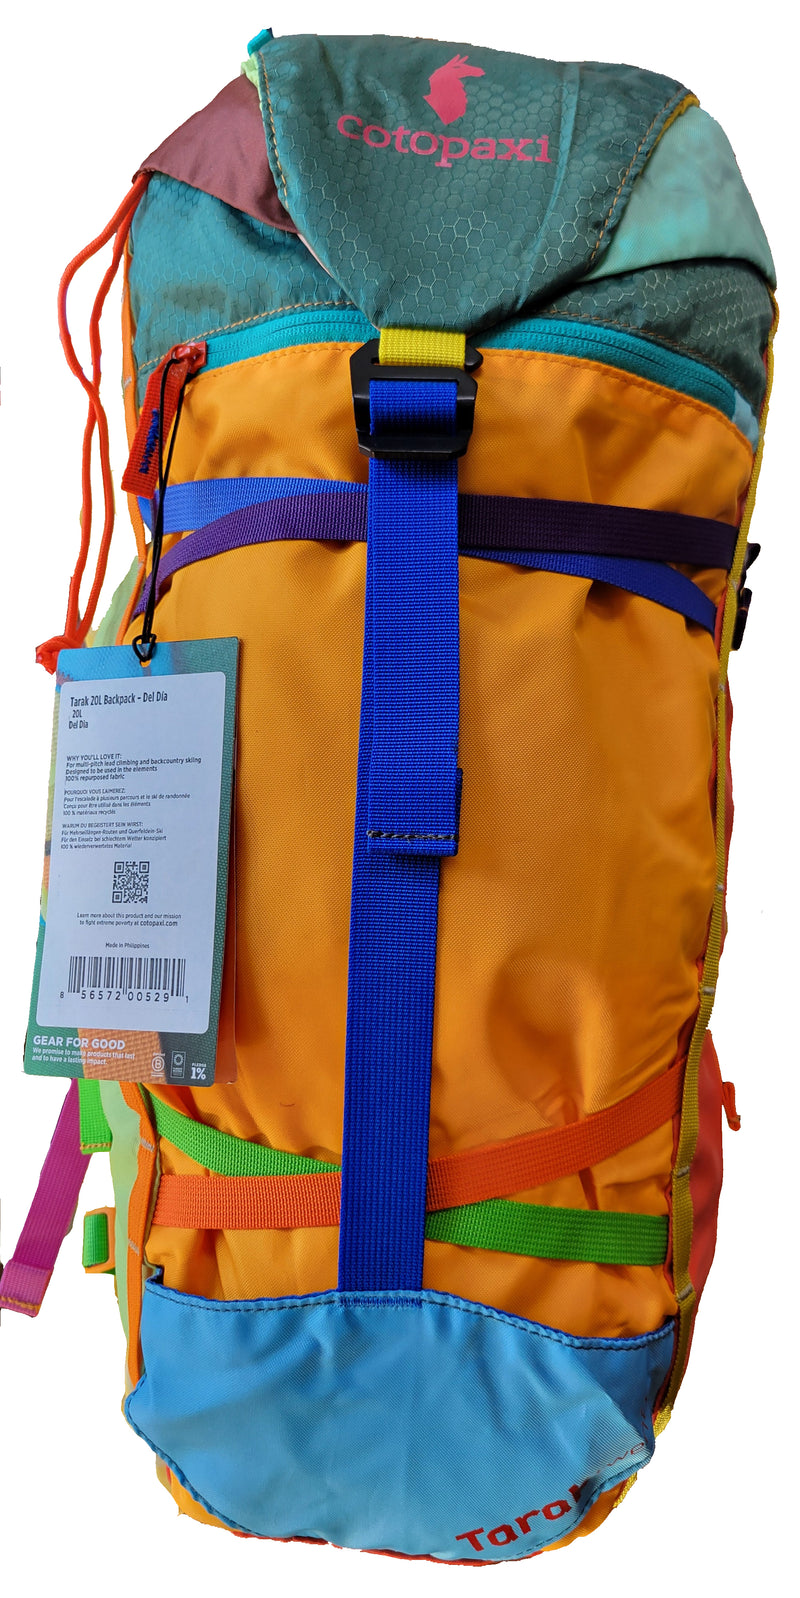 Load image into Gallery viewer, Cotopaxi Tarak 20L Backpack Del Dia
